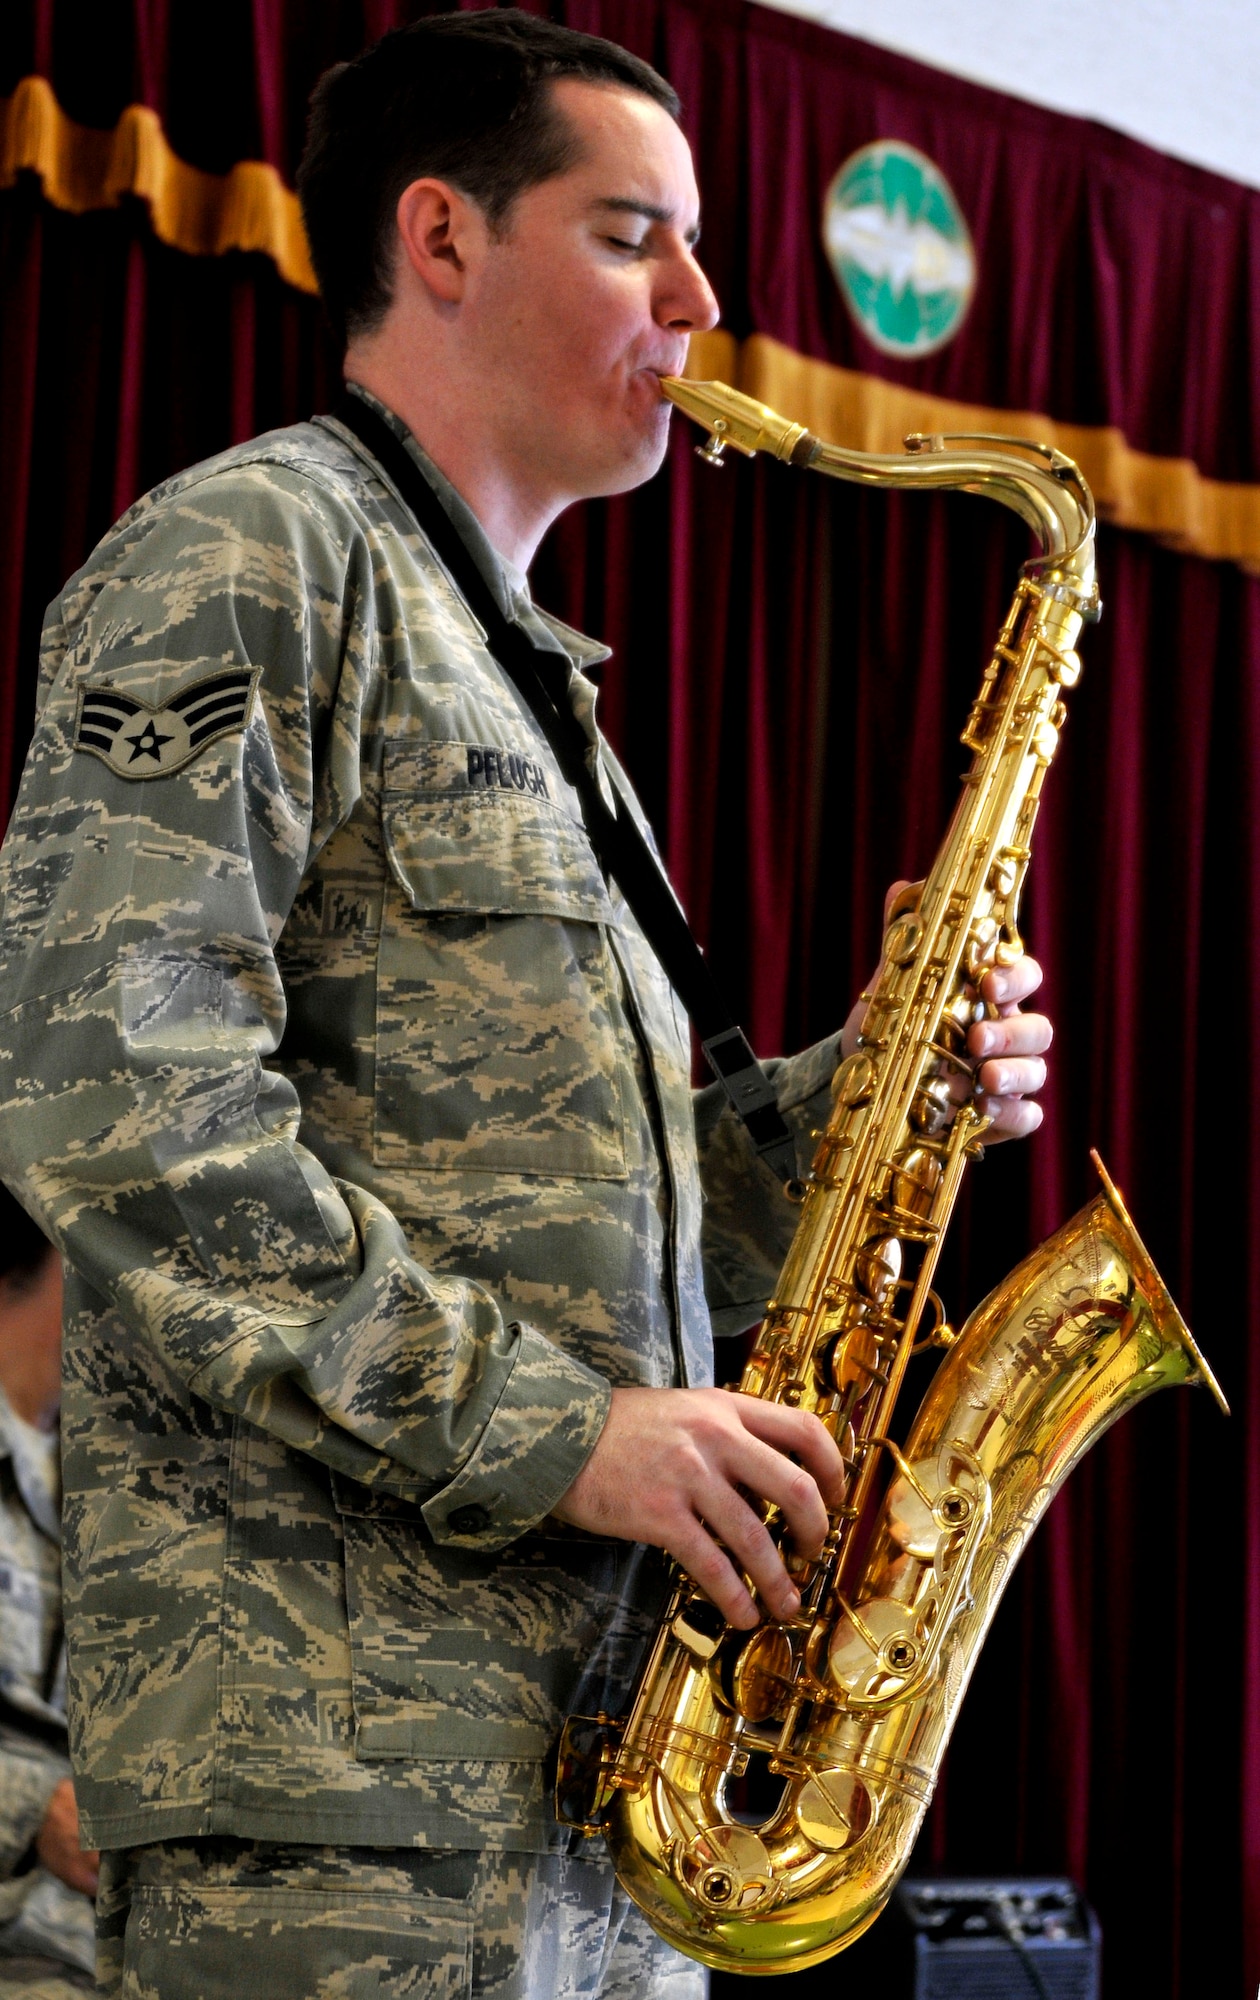 U.S. Air Force Senior Airman Greg Pflugh, U.S. Air Force Band of the Pacific-Asia Jazz Combo operations manager, plays his saxophone to children at the Misawa Municipal First Preschool Dec. 10, 2012, Misawa City, Japan.  The band performed for more than 200 children during this visit. (U.S. Air Force photo by Tech. Sgt. Phillip Butterfield)